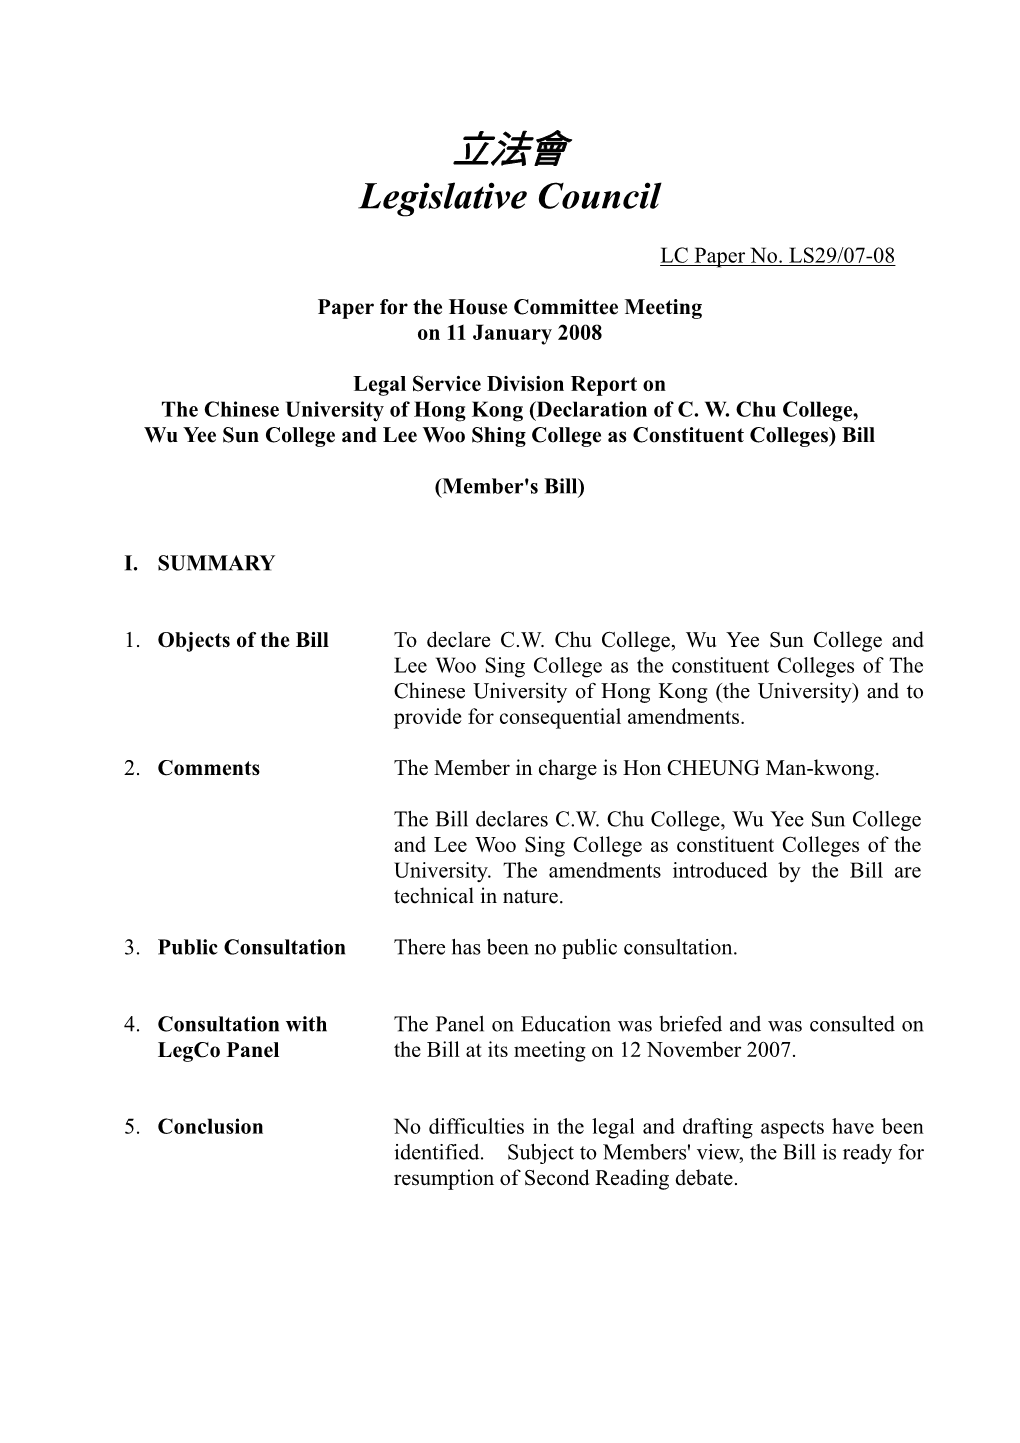 Declaration of C. W. Chu College, Wu Yee Sun College and Lee Woo Shing College As Constituent Colleges) Bill